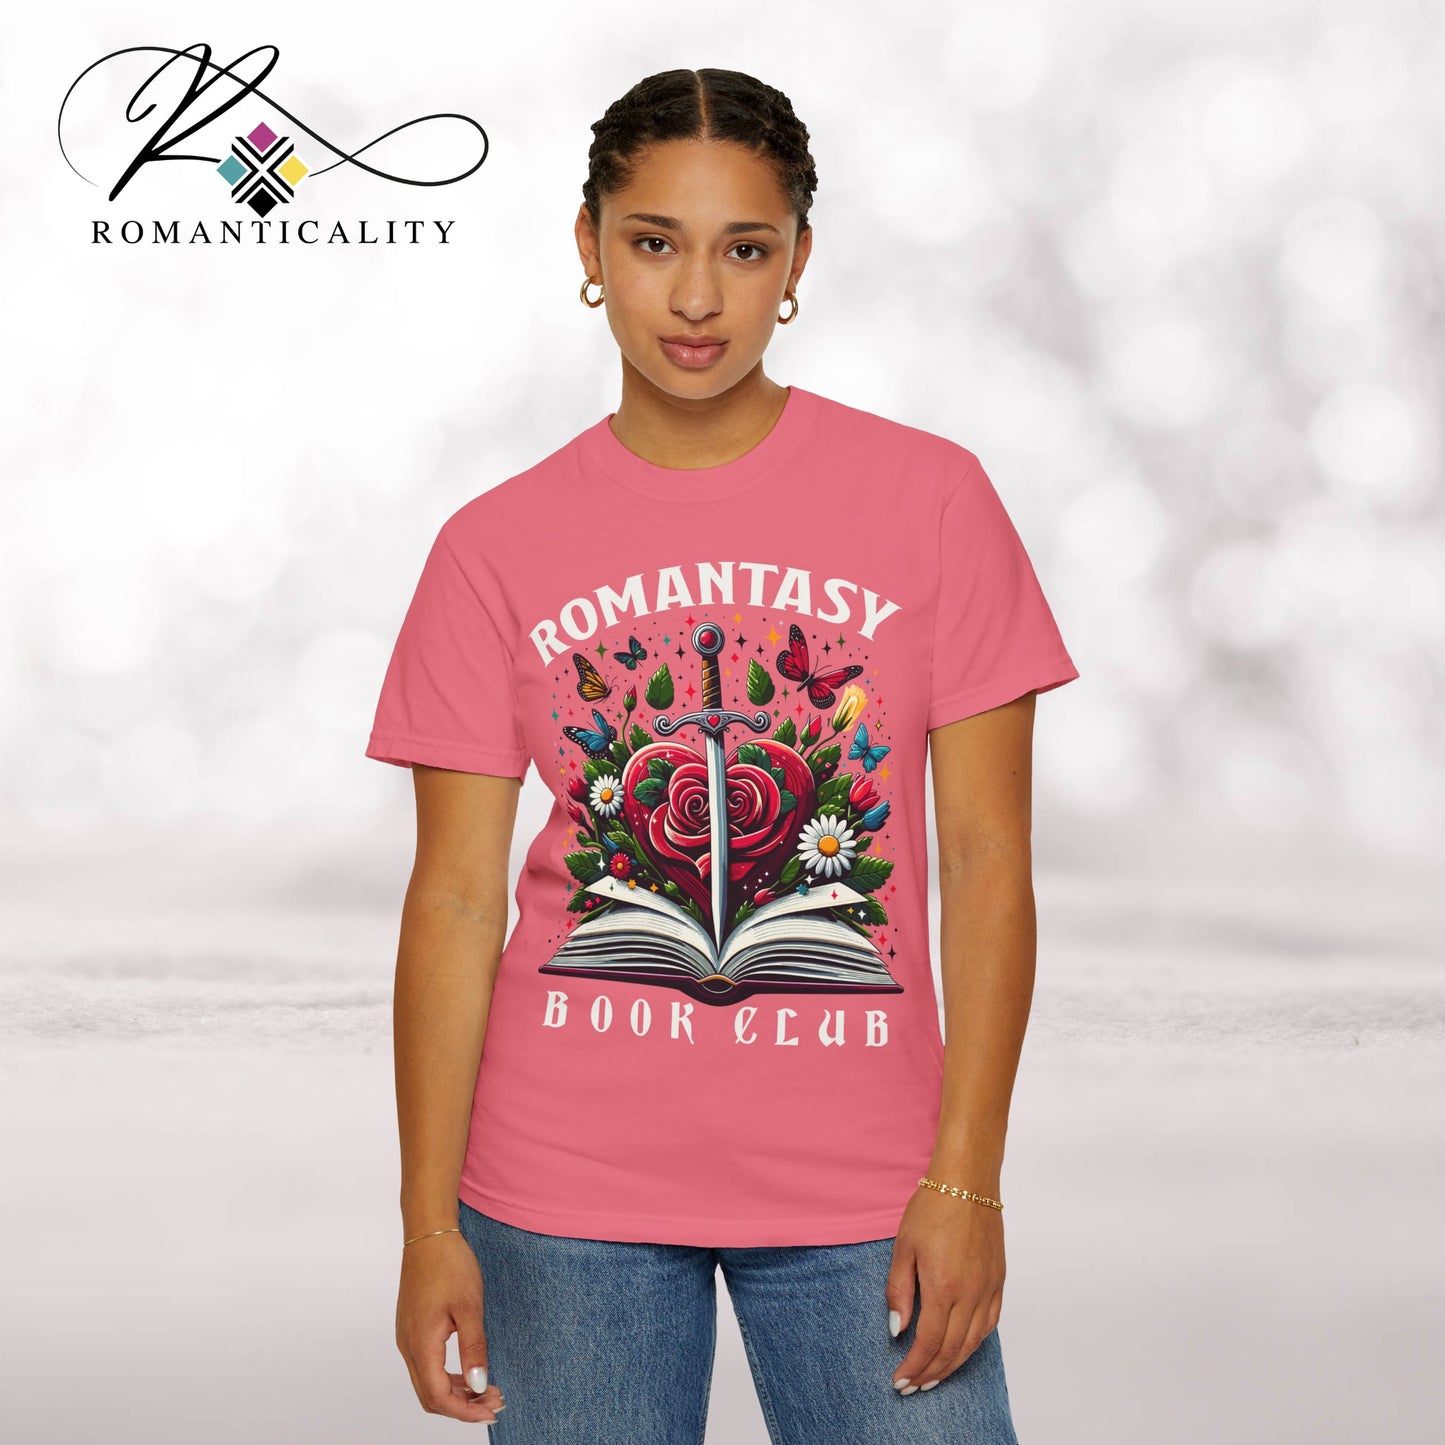 Romantasy Book Club Tee-Array of Colors-Comfortable Book Lover T-Shirt-Gift for Readers/Writers